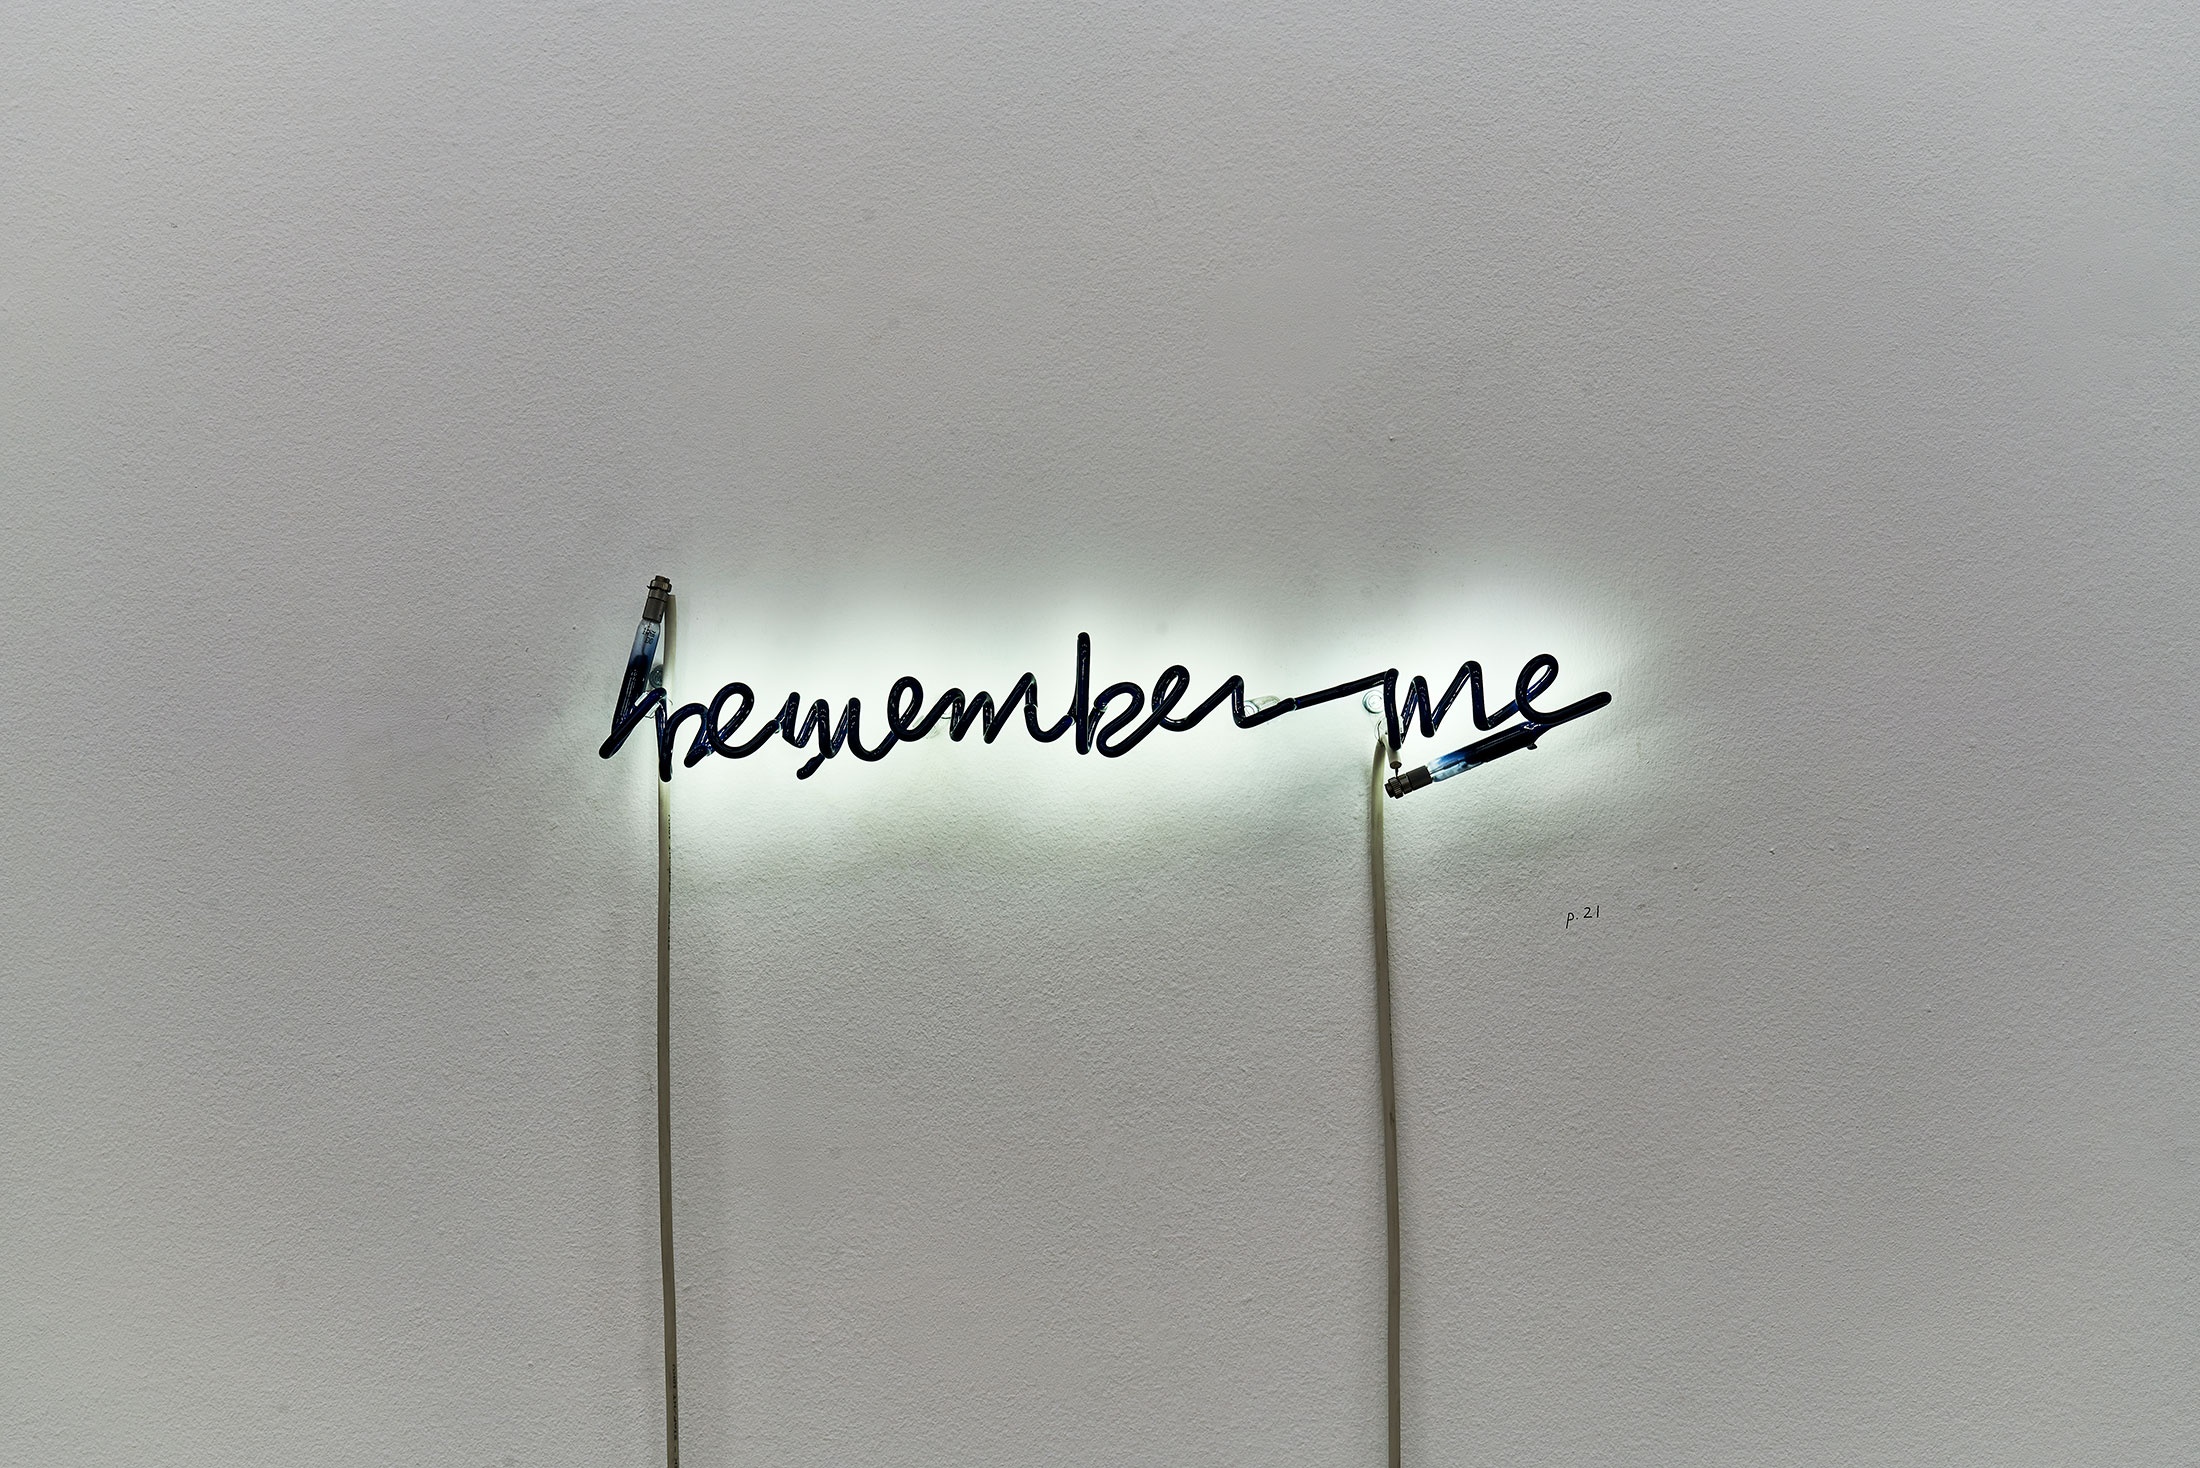 Installation photograph of Steve McQueen’s neon tube and acrylic paint sculpture ‘Remember Me,’ from the Customs exhibition in A4’s Gallery, that shows the phrase “remember me” described in neon tubing with the front covered over with acrylic paint and mounted on a white wall.
